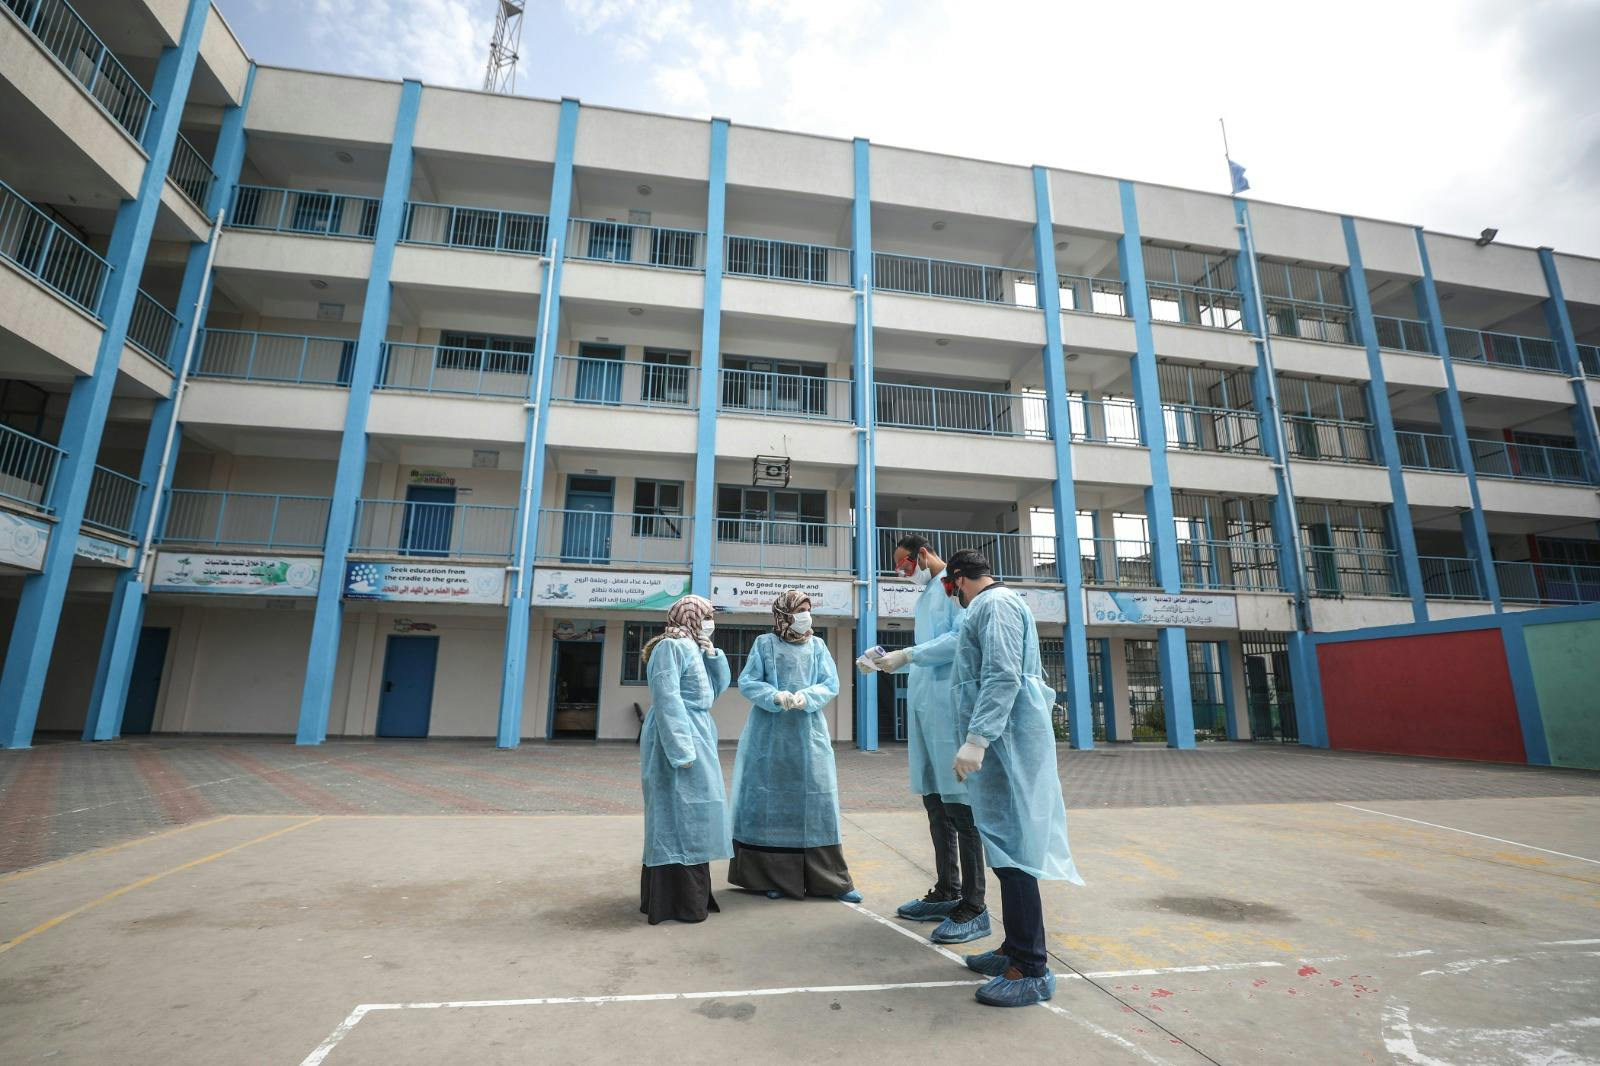 Health workers in protective gear discussing with each other, and in the background a tall building.